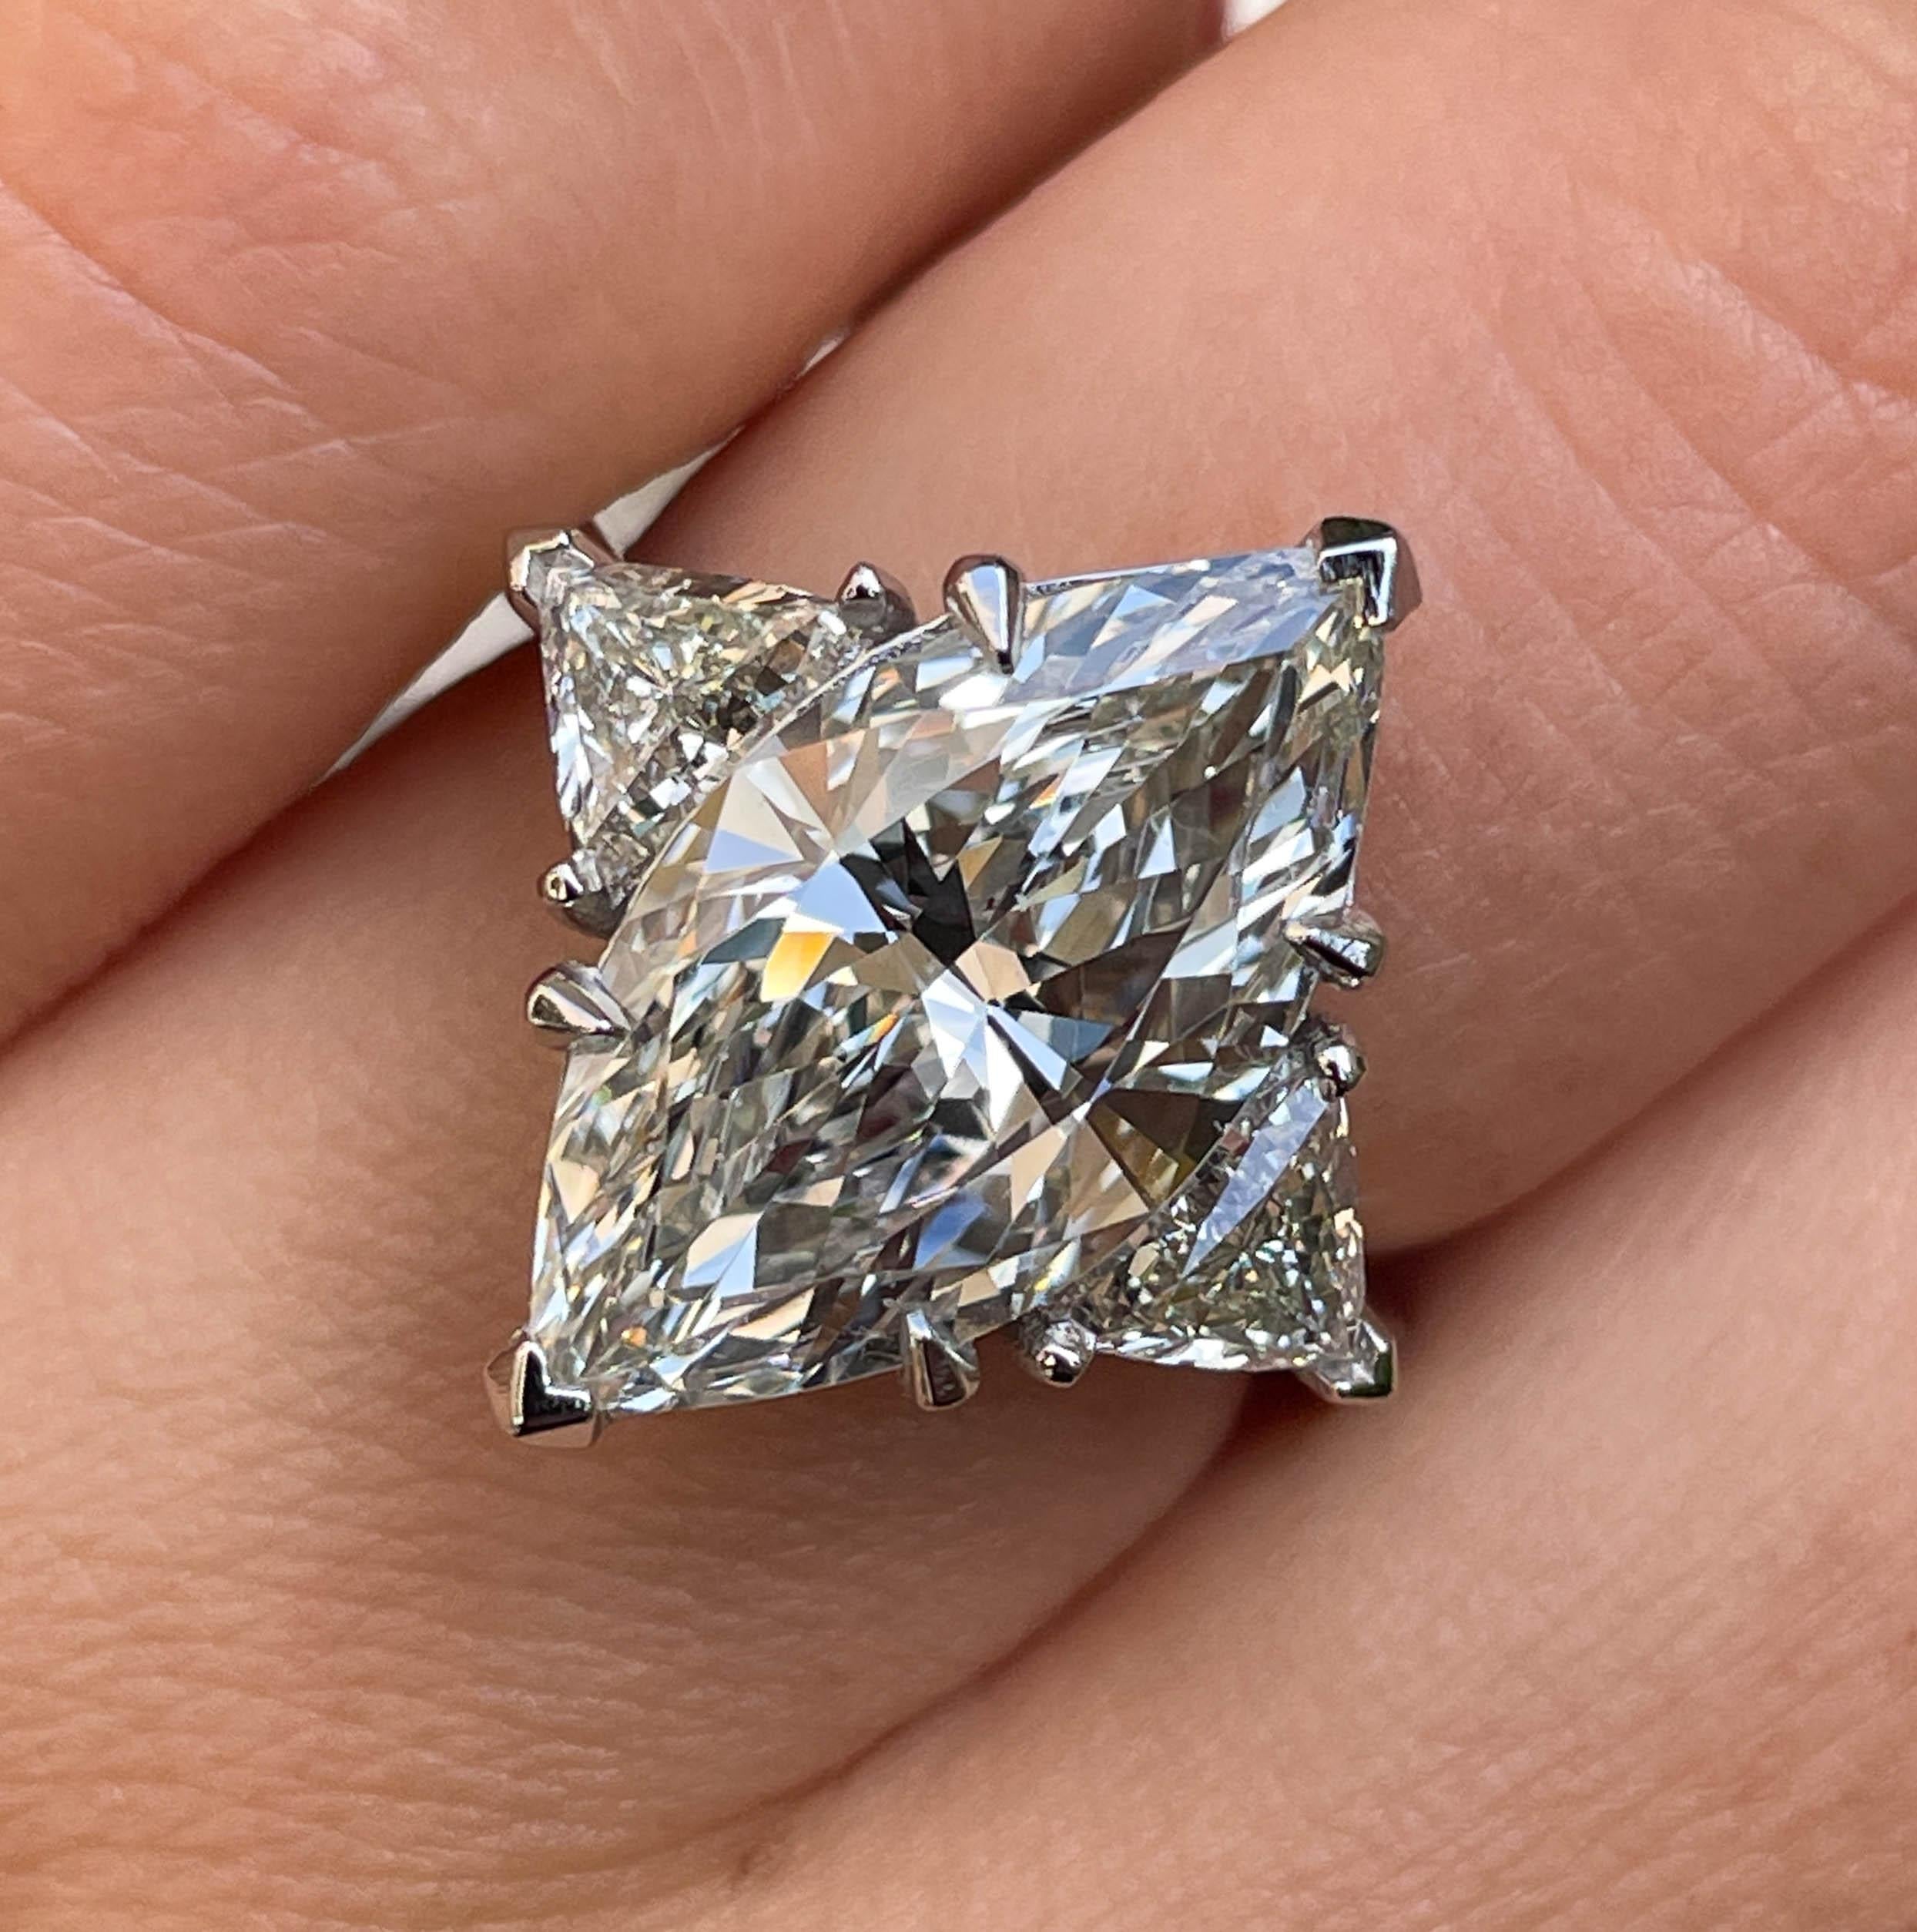 An Amazing HUGE Estate Vintage Diamond Engagement ring in Platinum (stamped) with GIA Certified 4.35ct Marquise Center Diamond in M color VS2 clarity (Appears Warm White and Very Clear). The Measurements of the Diamond are 17.45X8.84X5.42mm. GIA